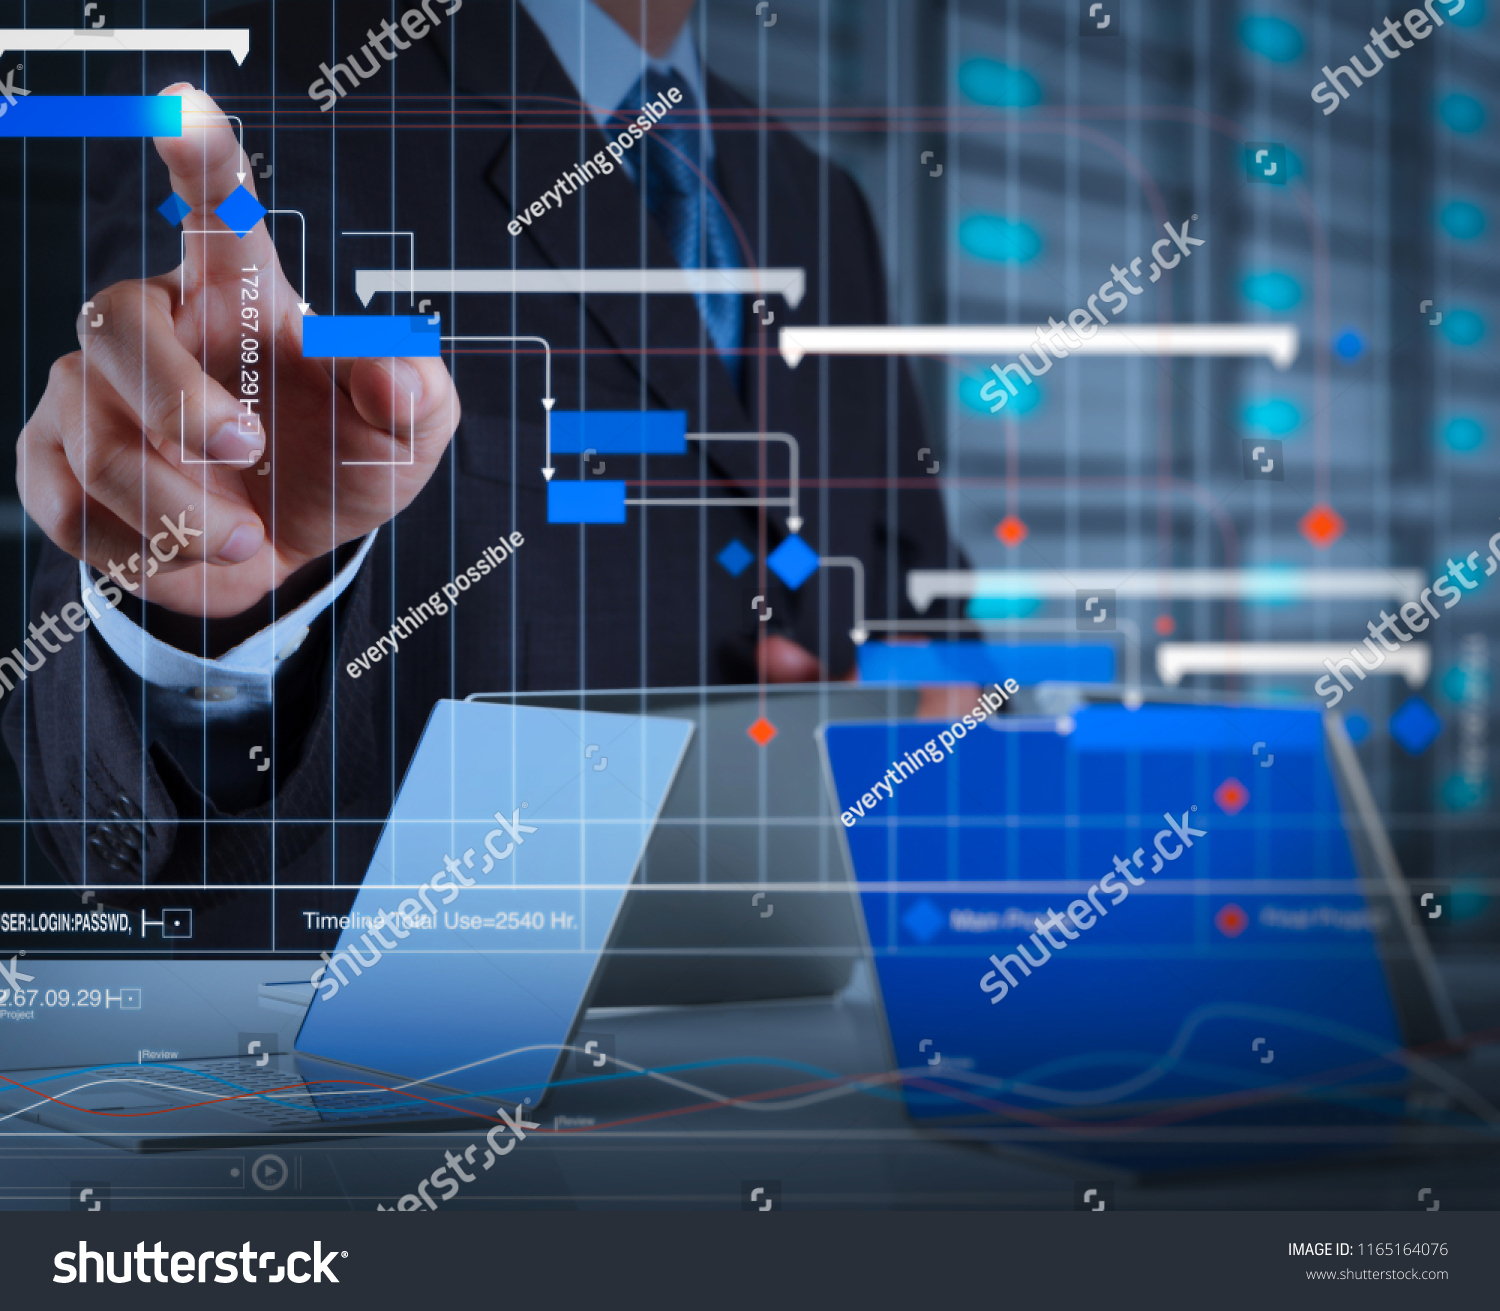 Project manager working and update tasks with milestones progress planning and Gantt chart scheduling virtual diagram.businessman hand pressing a touchscreen button on server background. #1165164076